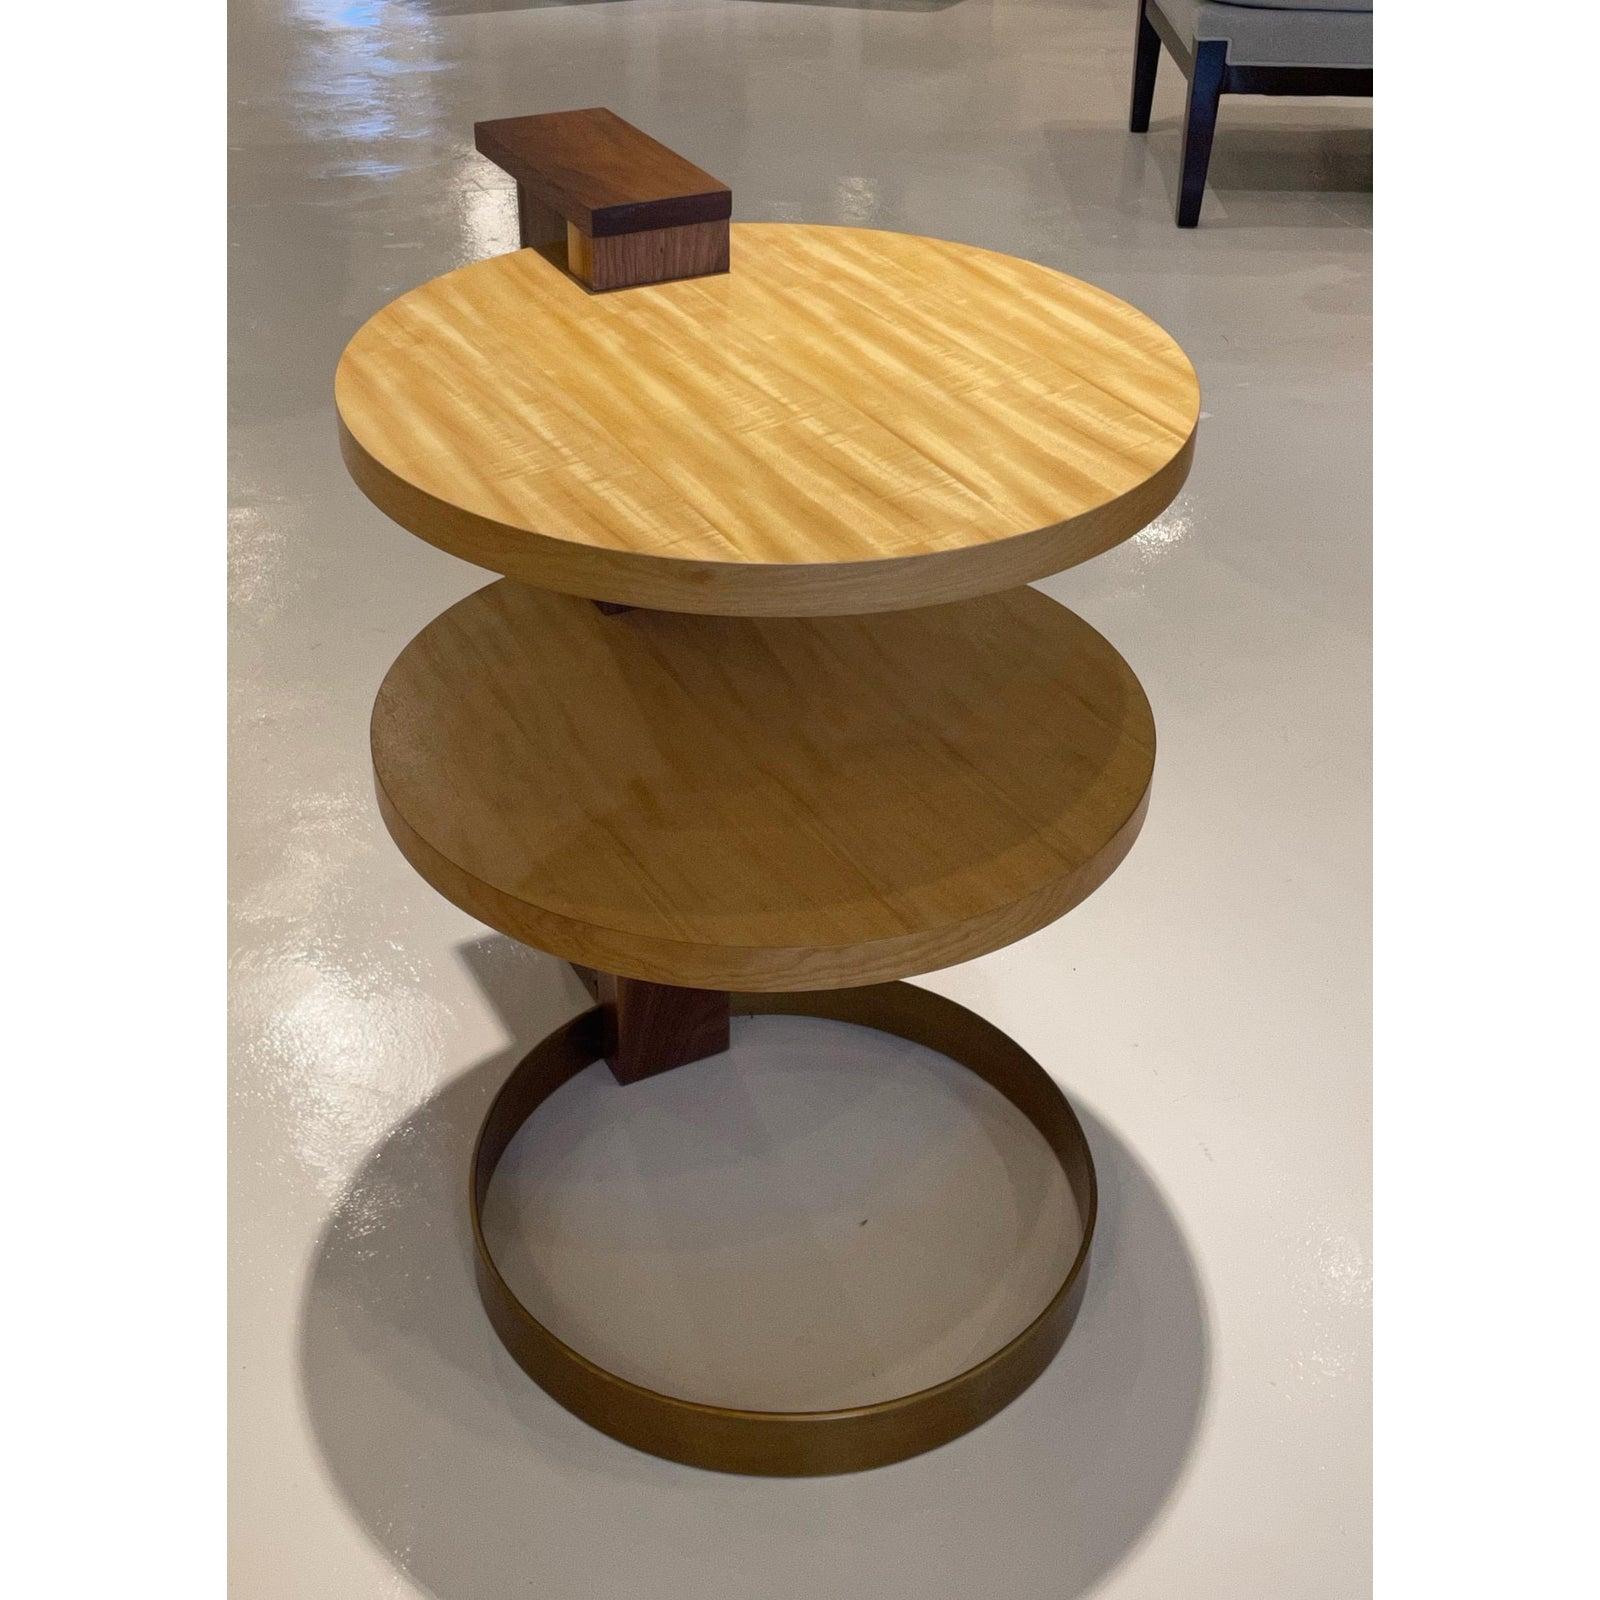 Showroom new - The Nina is an eye catcher. Two cantilevered shelves of Beeswing Primavera fit perfectly into the solid Walnut spine of this art deco inspired side table. Nina is grounded by a solid metal, antique brass ring, with a perpendicular